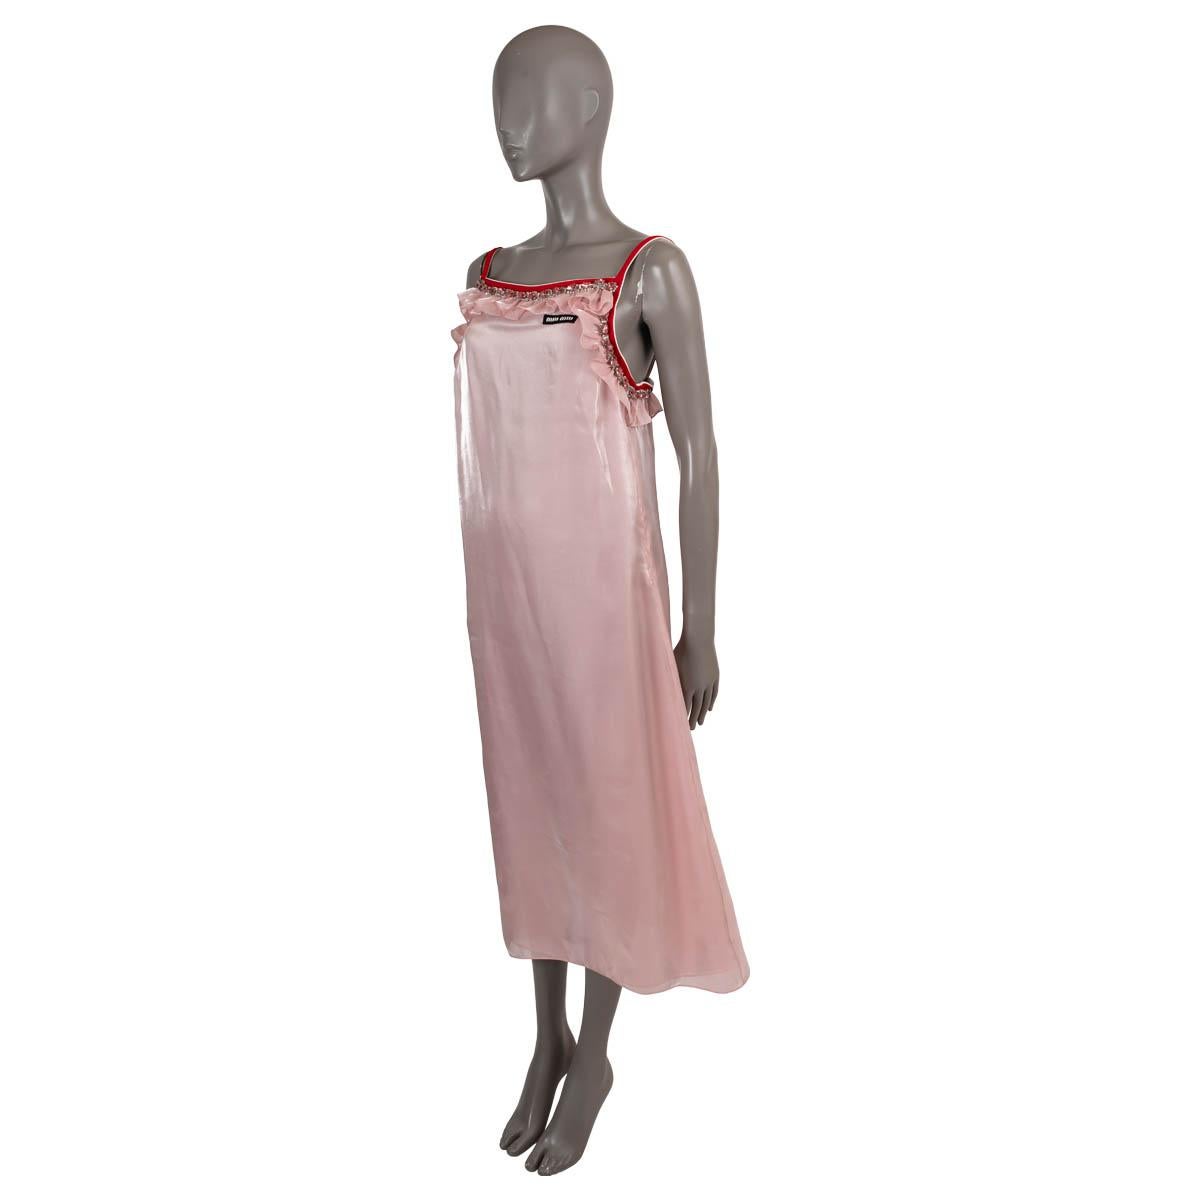 100% authentic Miu Miu slip dress in pink voile polyester (100% - please note the content tag is missing). Features a square neck, A-line silhouette, spaghetti straps, a logo label and a crystal embellished ruffle trim. Opens with a concealed zipper